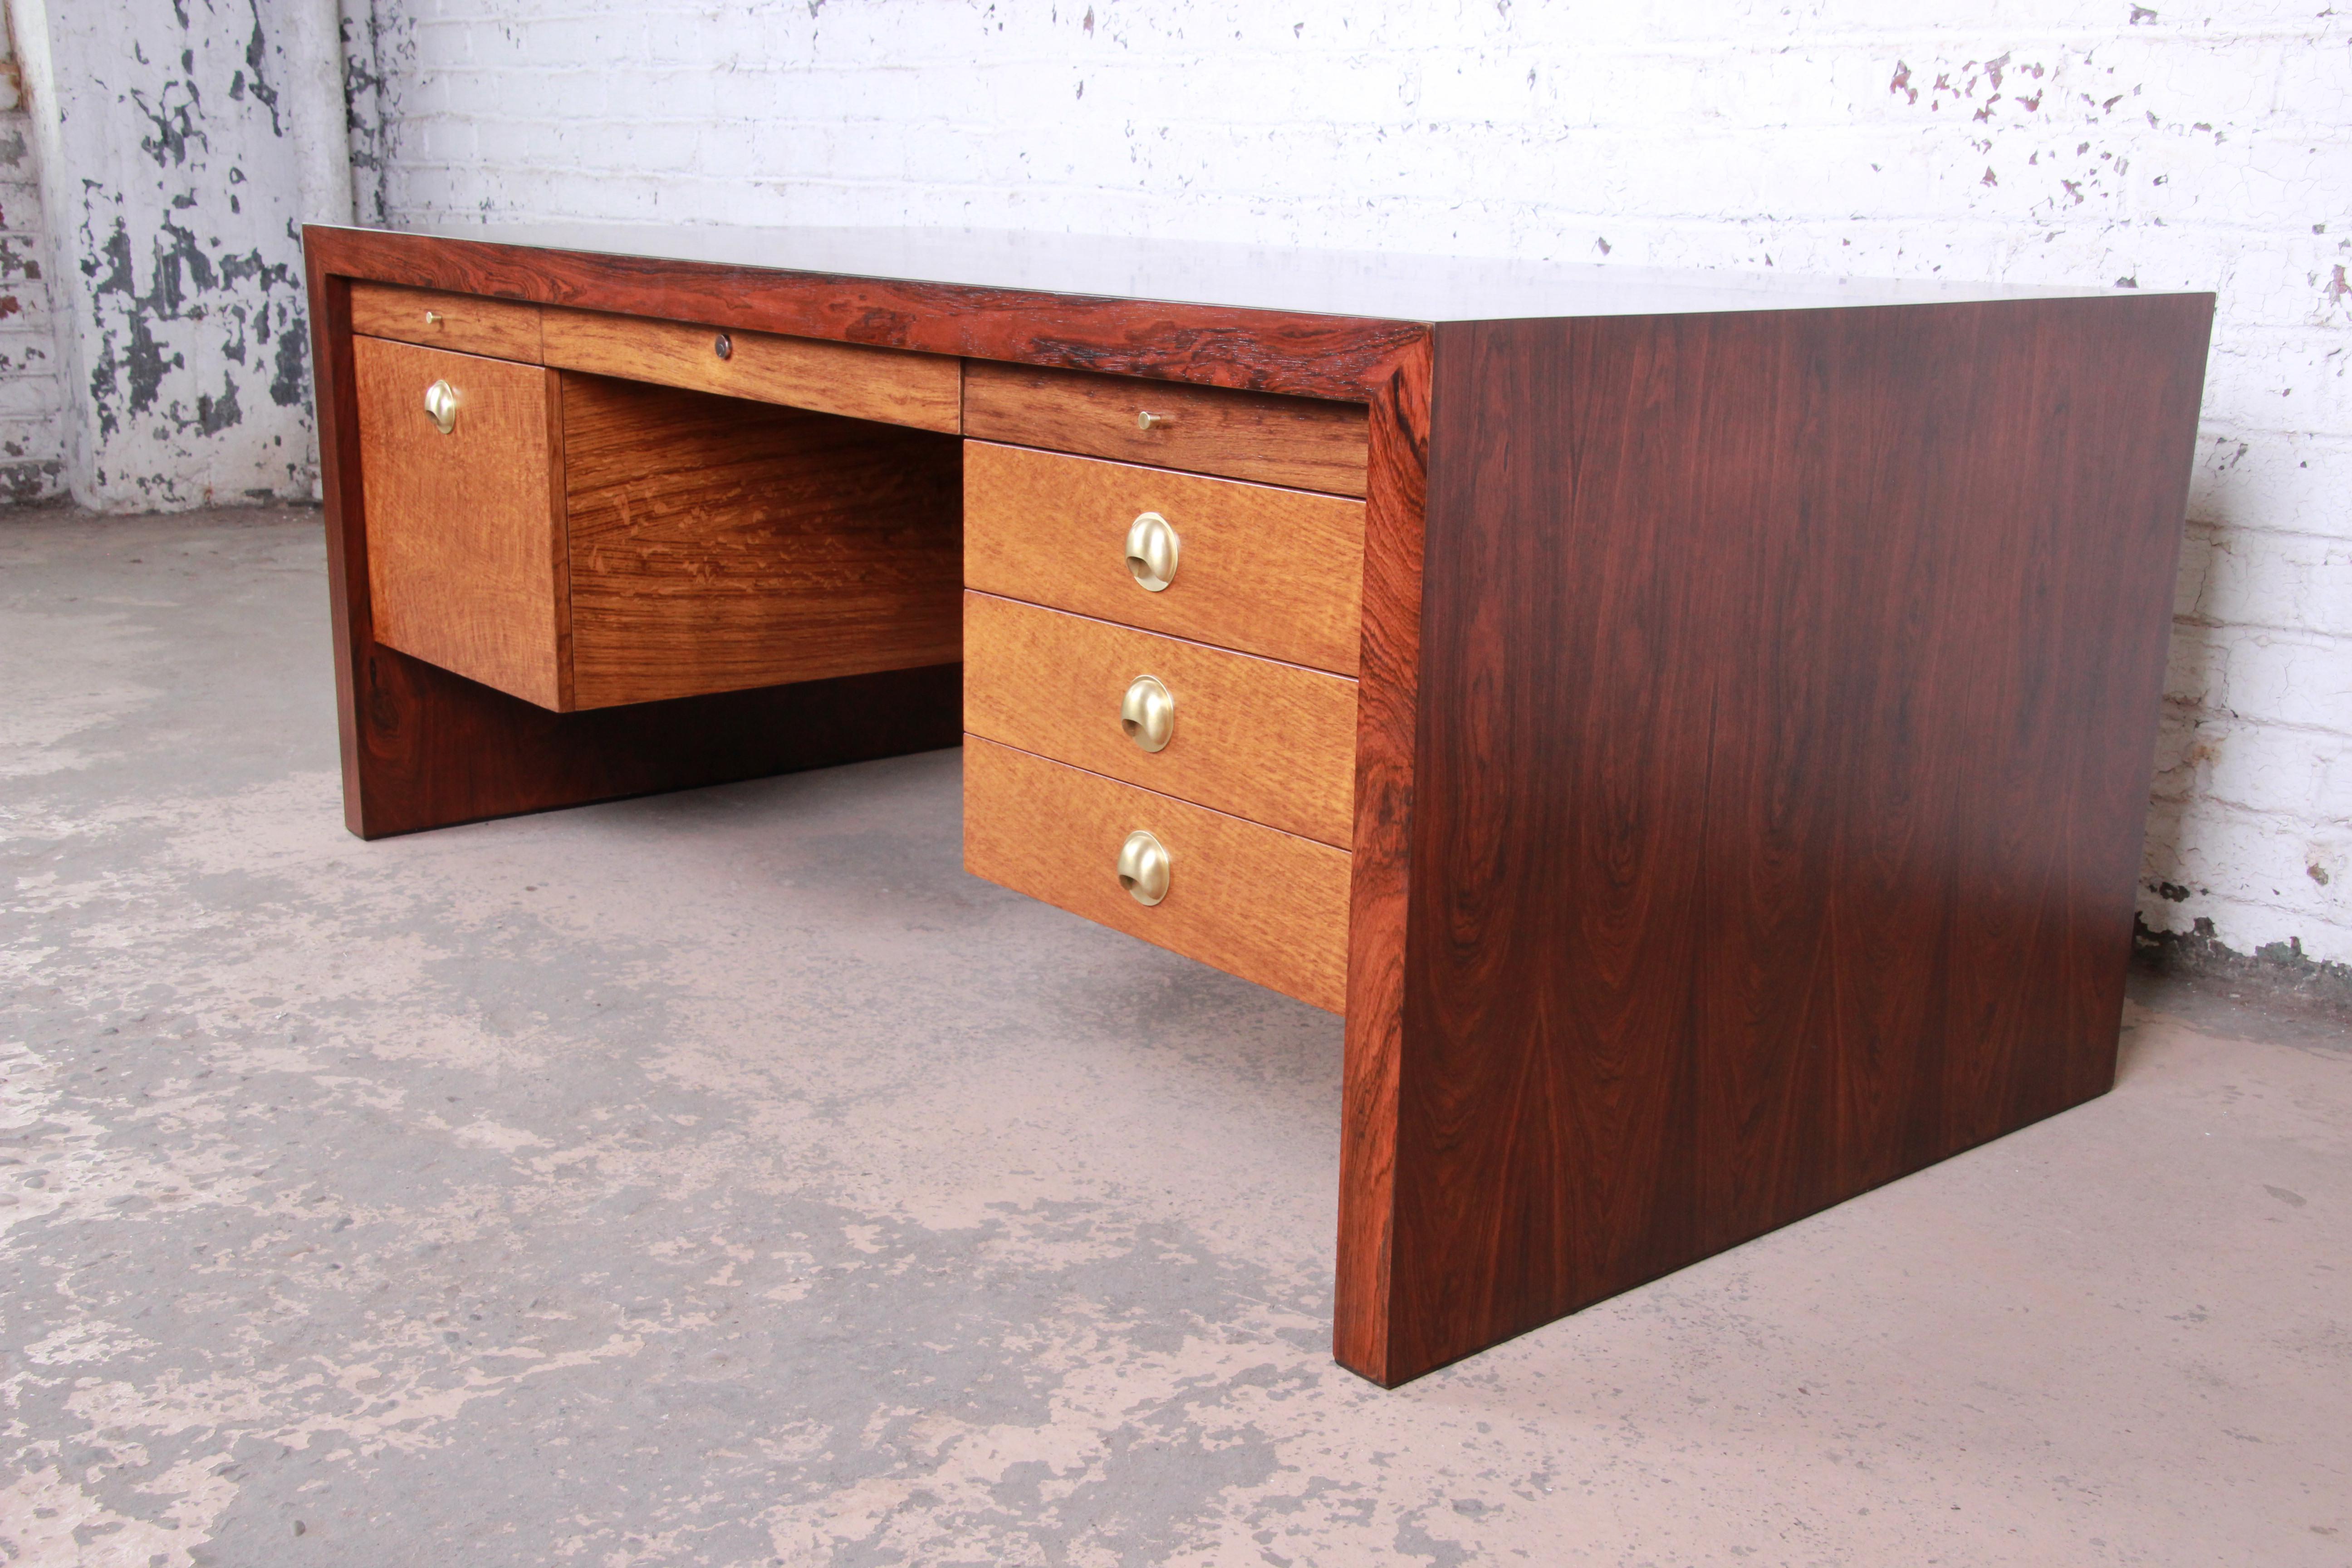 A rare and exceptional Mid-Century Modern executive desk by Edward Wormley for Dunbar Furniture. The desk features stunning rosewood grain and sleek mid-century design. It offers ample storage, with five drawers and two pull-out tablets in gorgeous